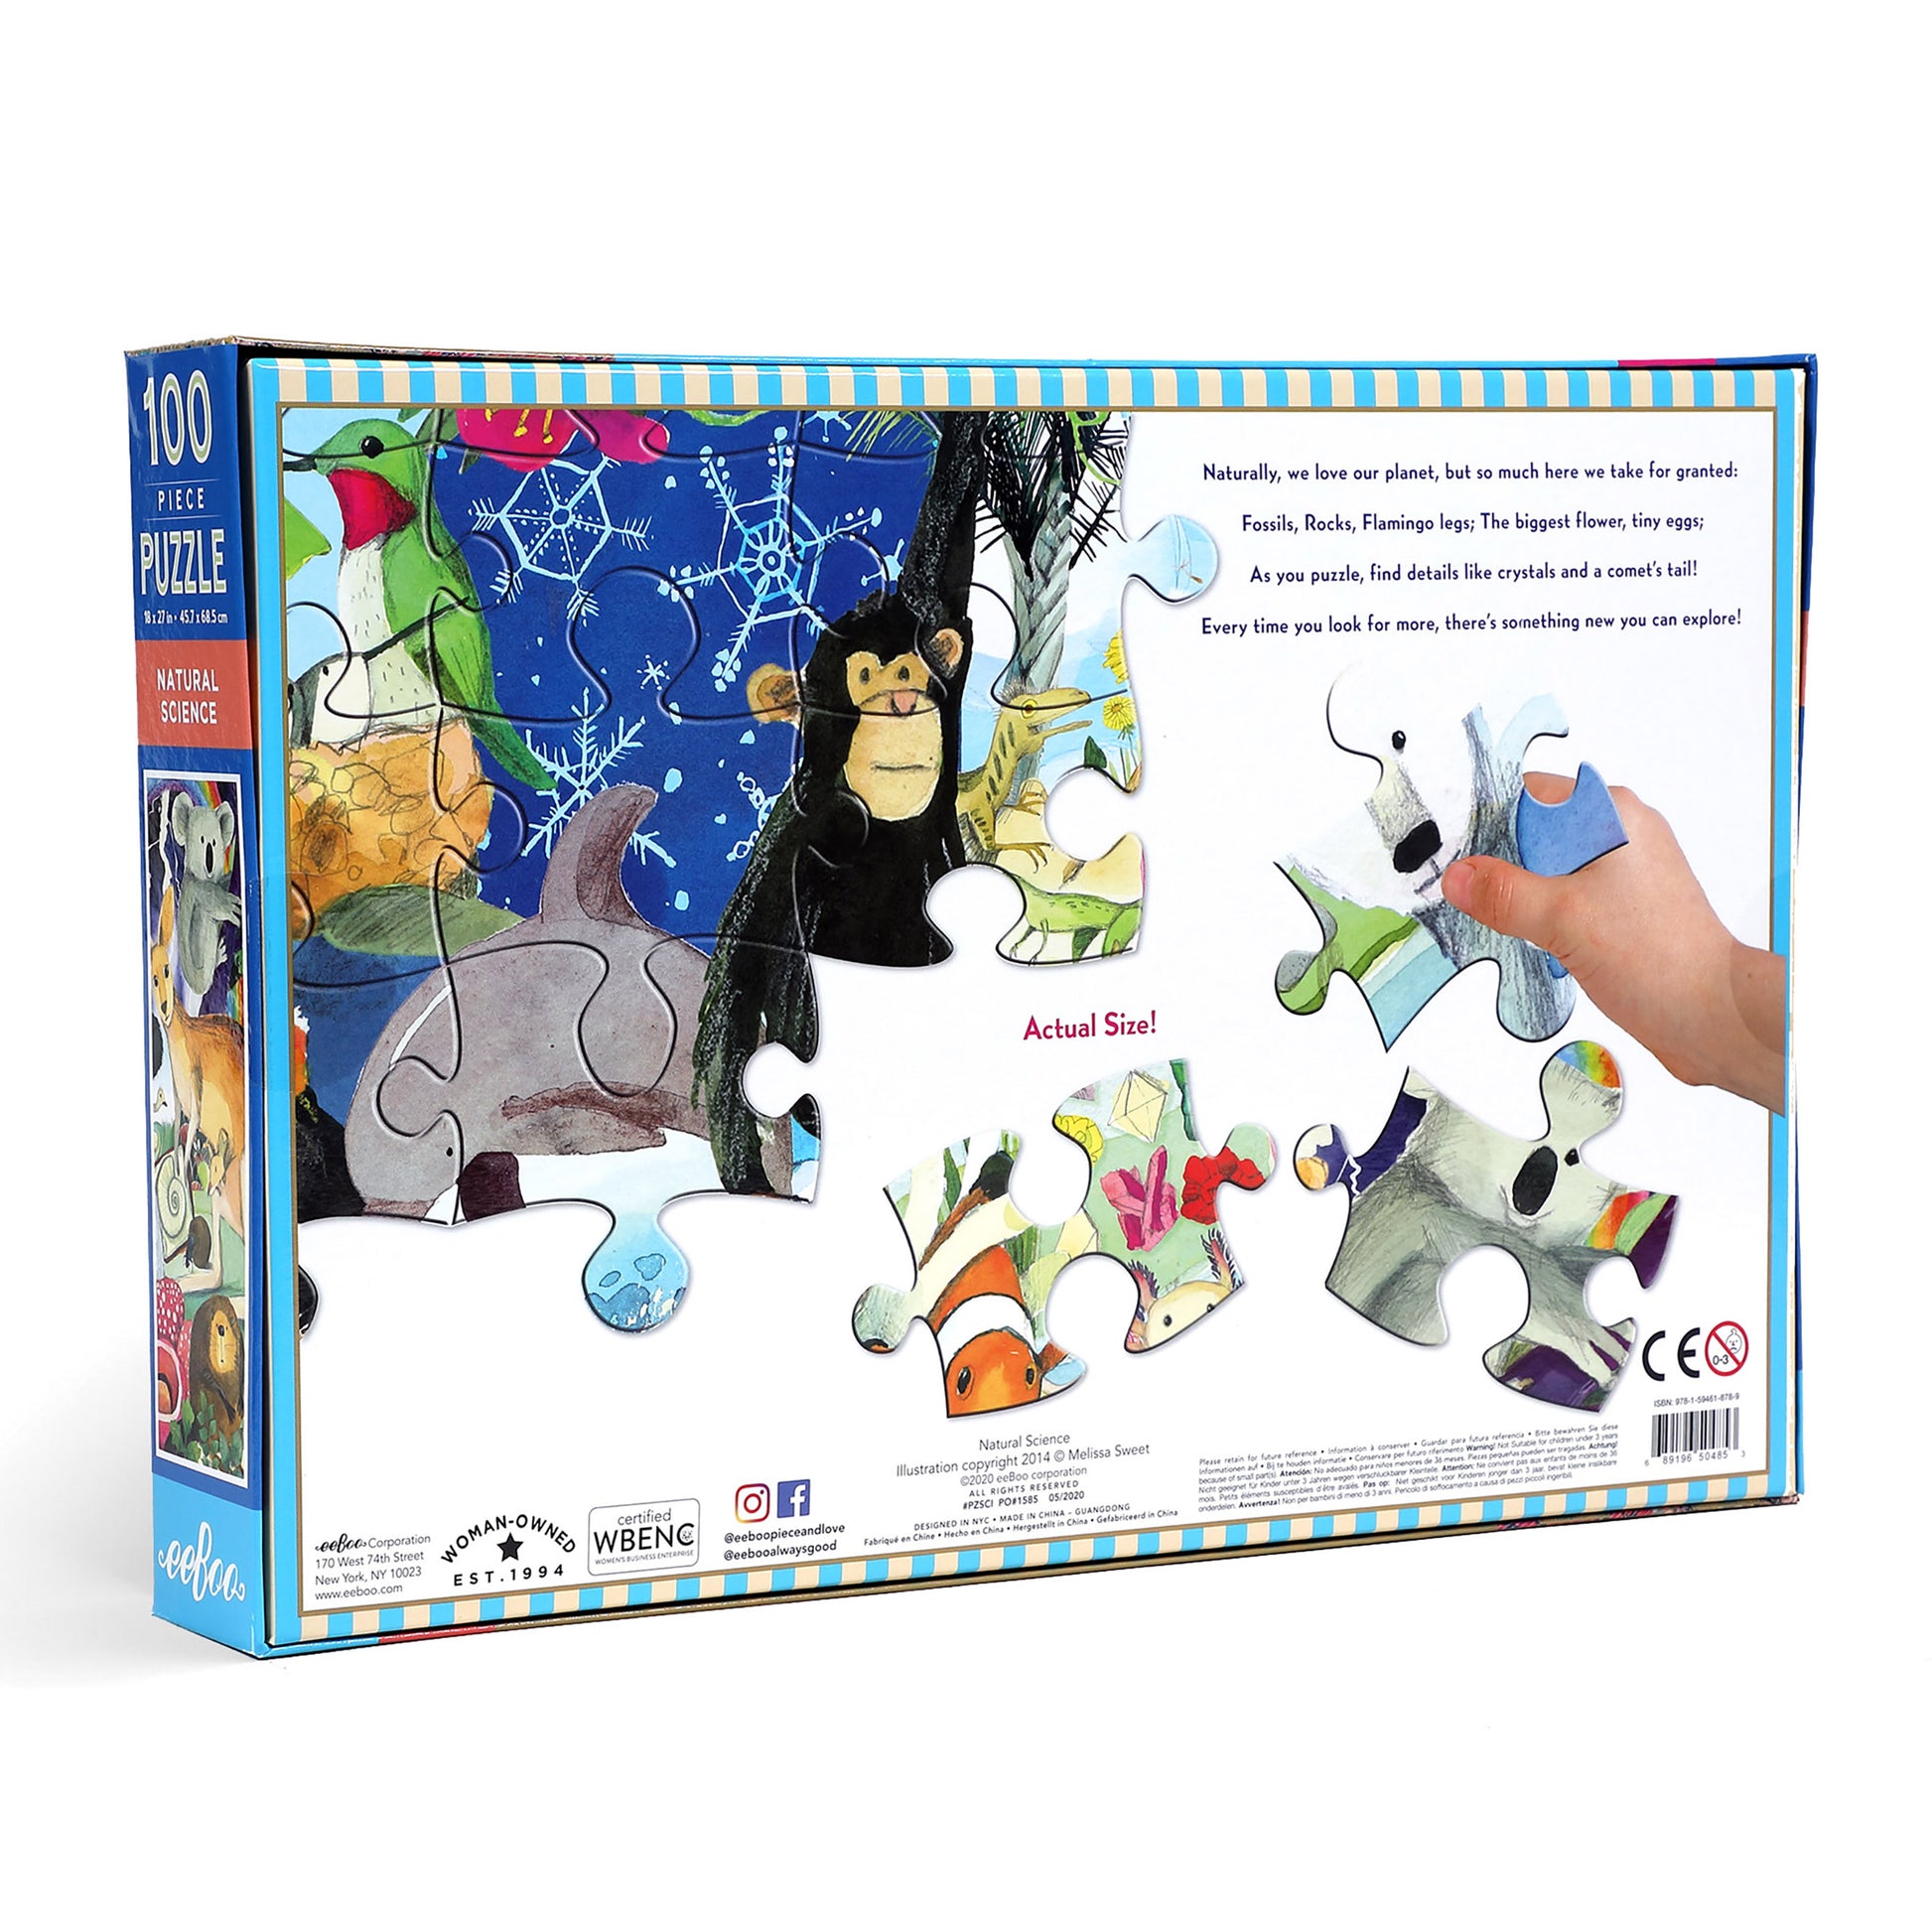 Natural Science Educational 100 Piece Puzzle with Facts eeBoo Ages 5+